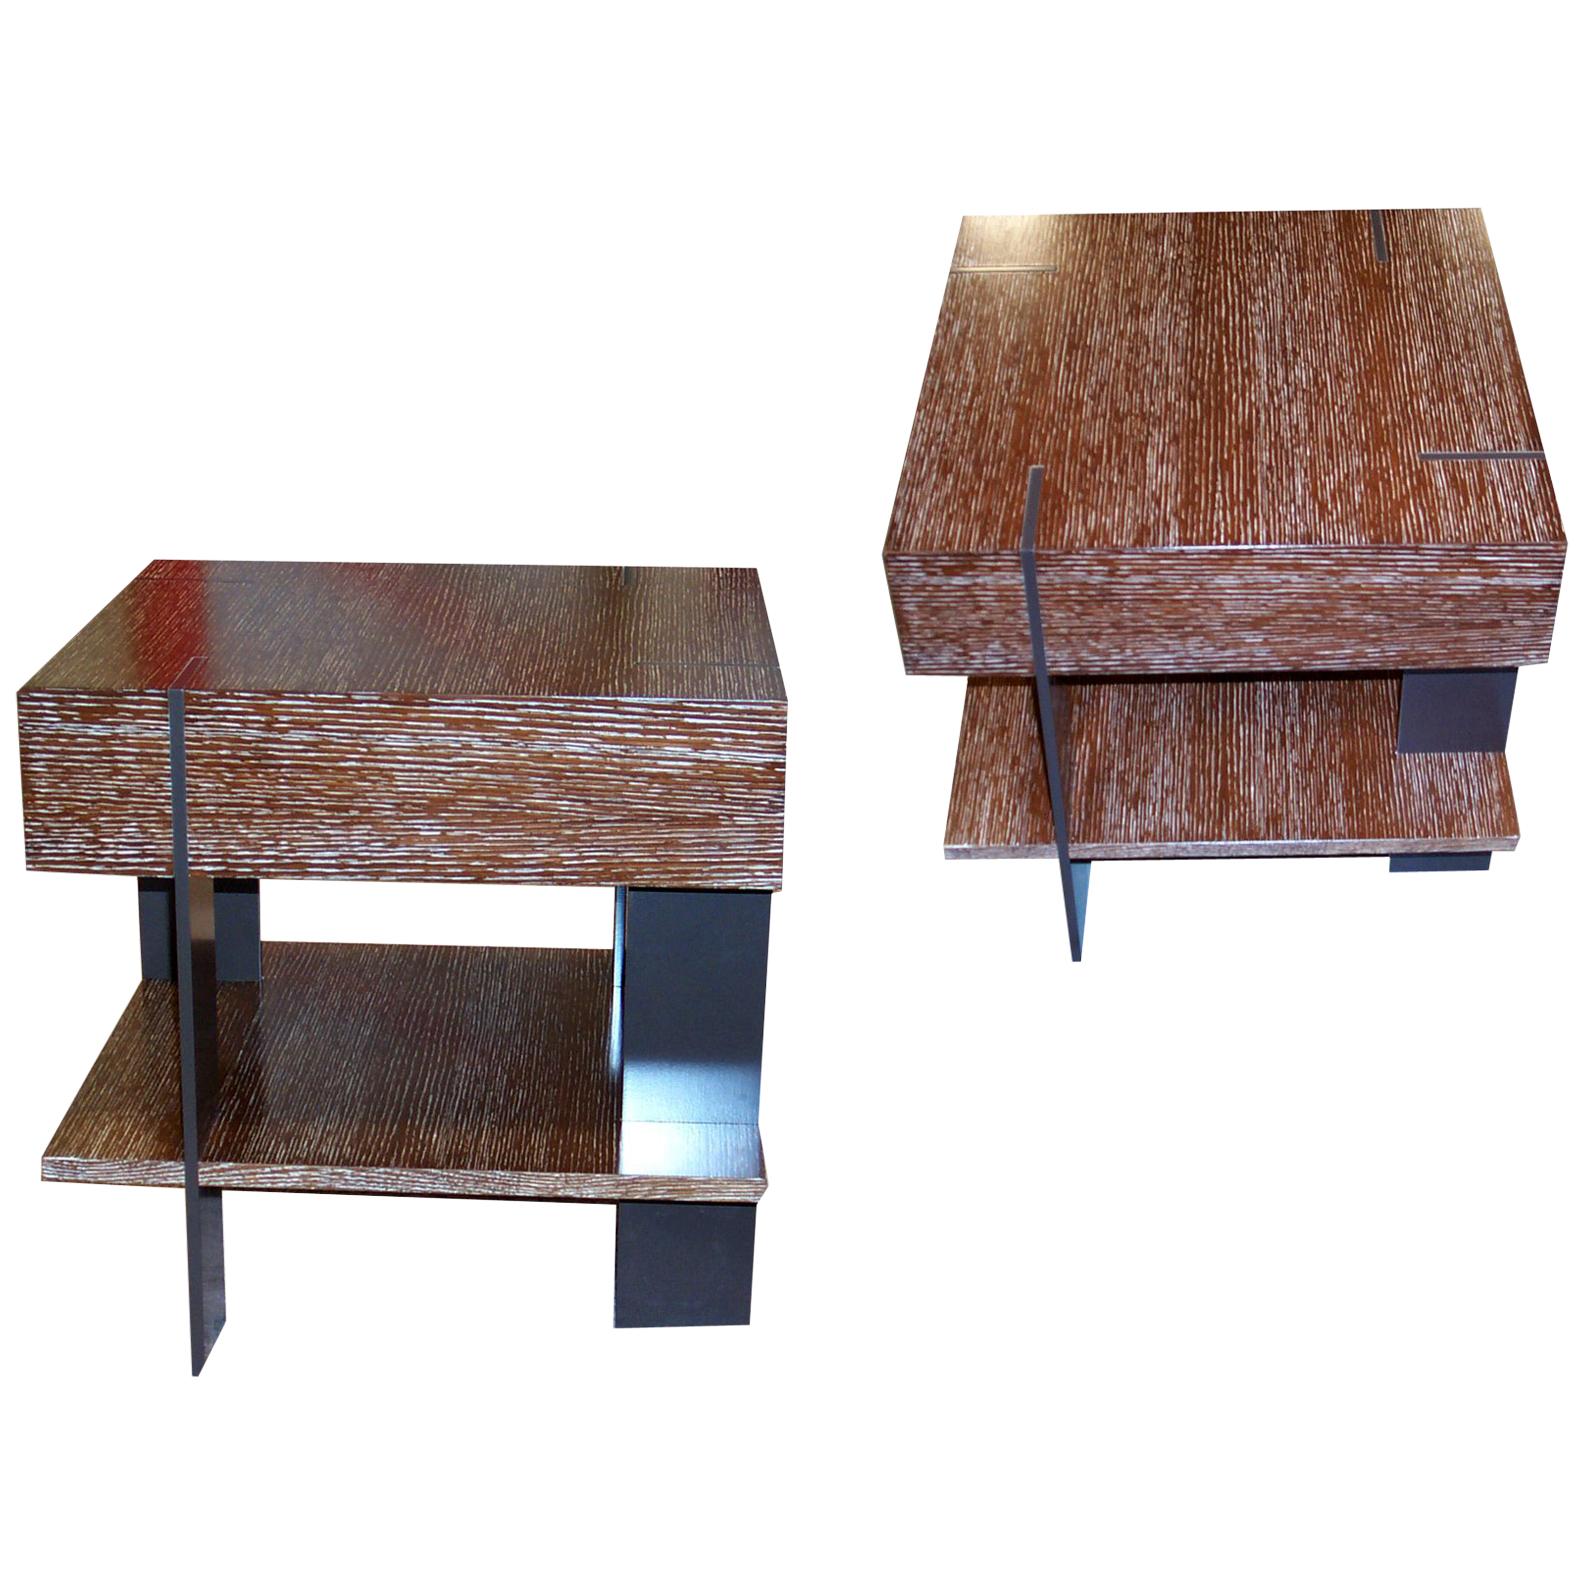 ET-23s End Table with Shelf and Metal Legs by Antoine Proulx For Sale